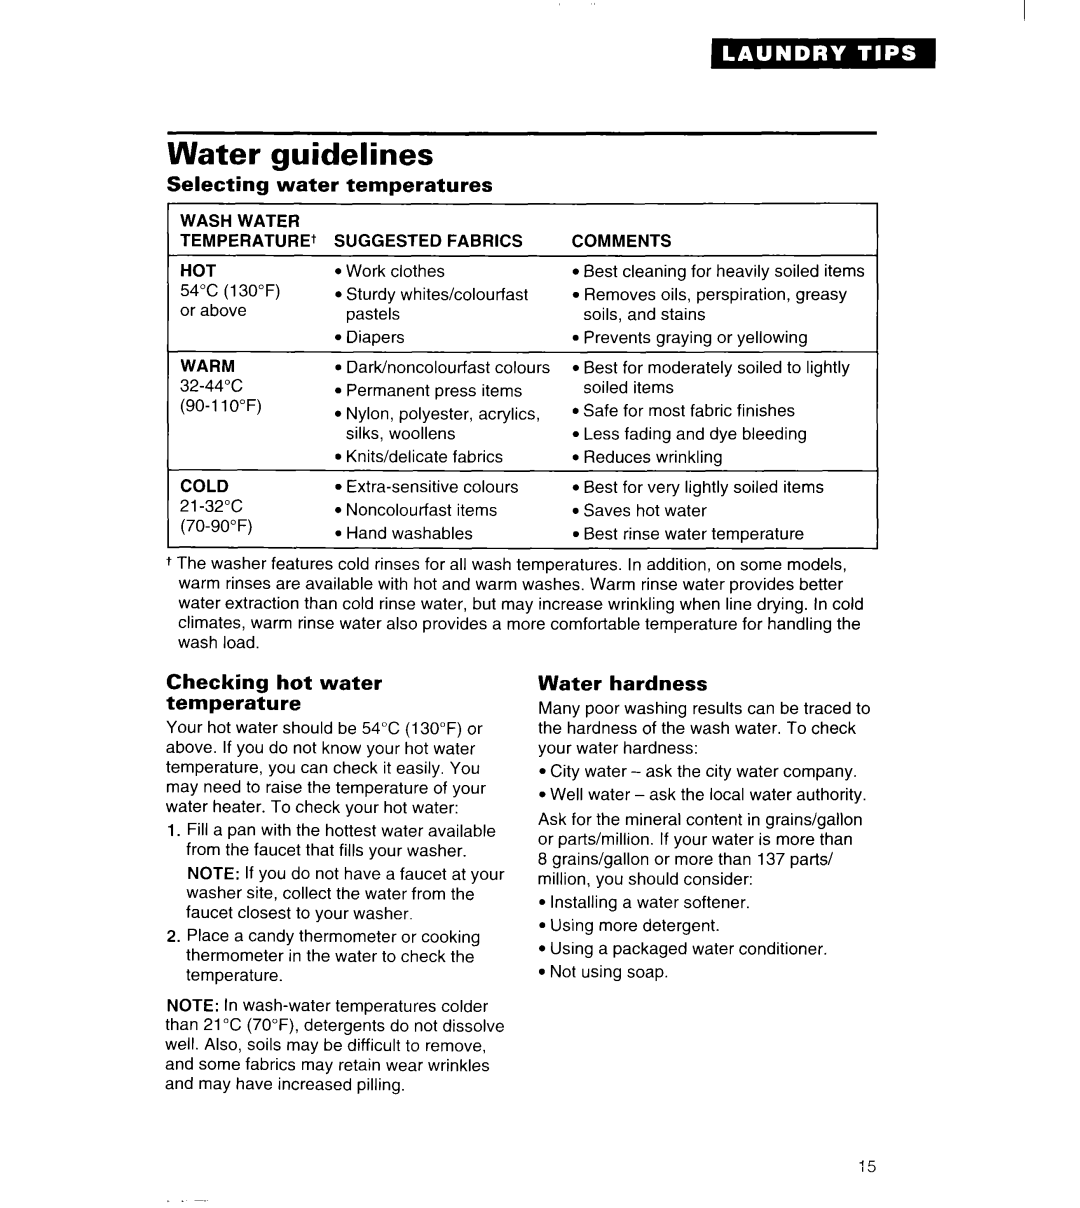 Whirlpool 3363834 warranty guidelines, Selecting, temperatures, Checking hot water temperature, Water hardness 